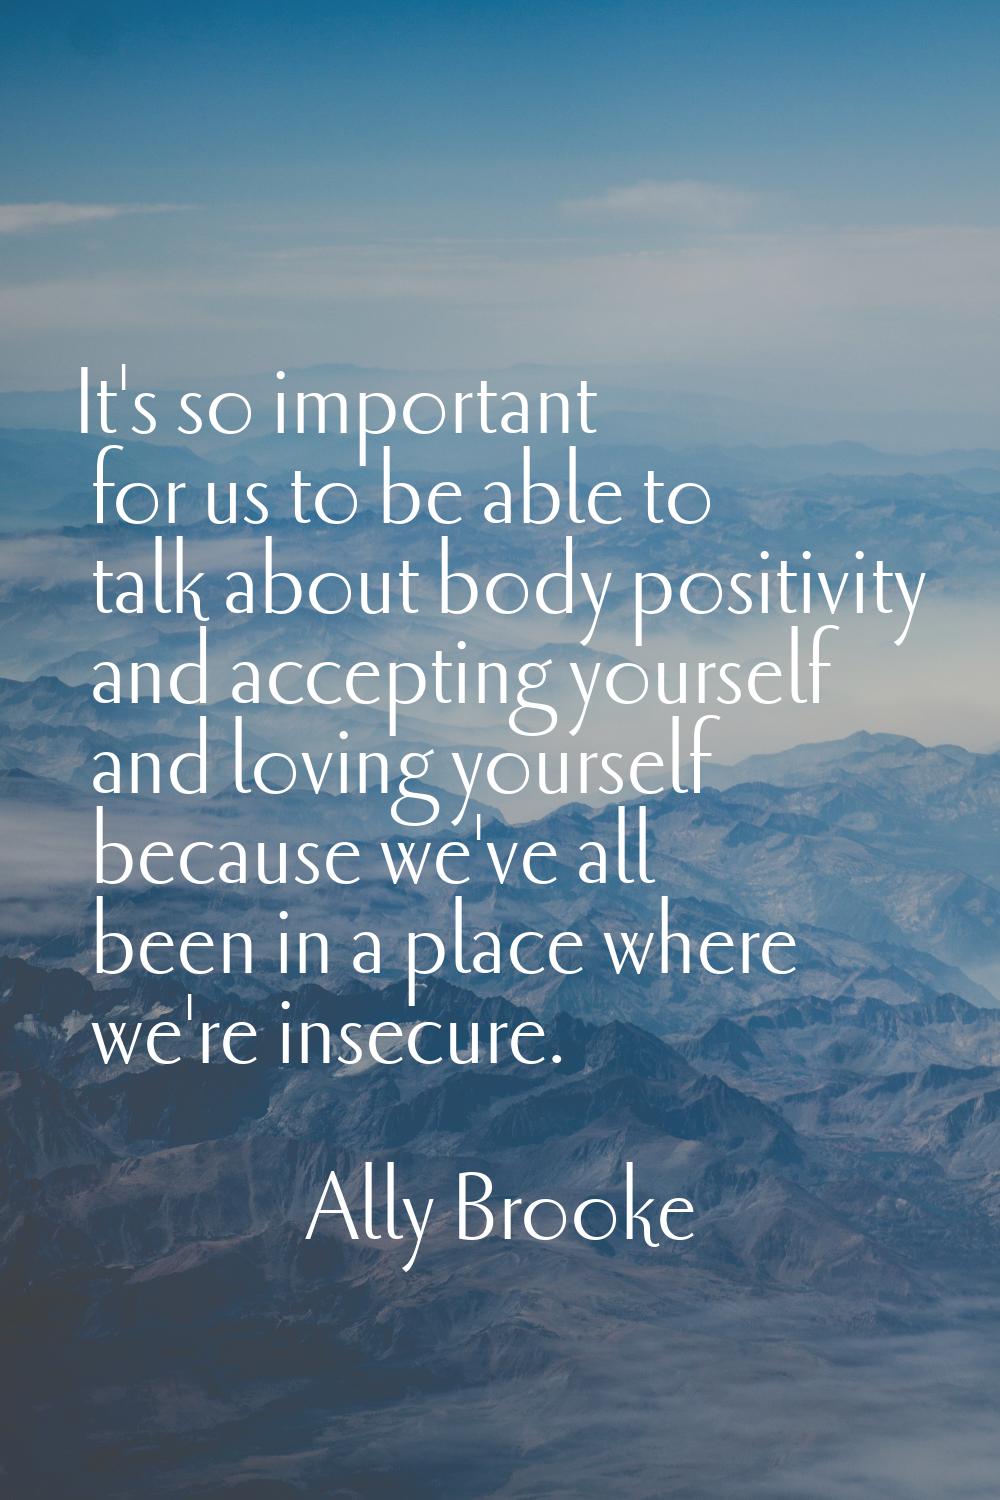 It's so important for us to be able to talk about body positivity and accepting yourself and loving